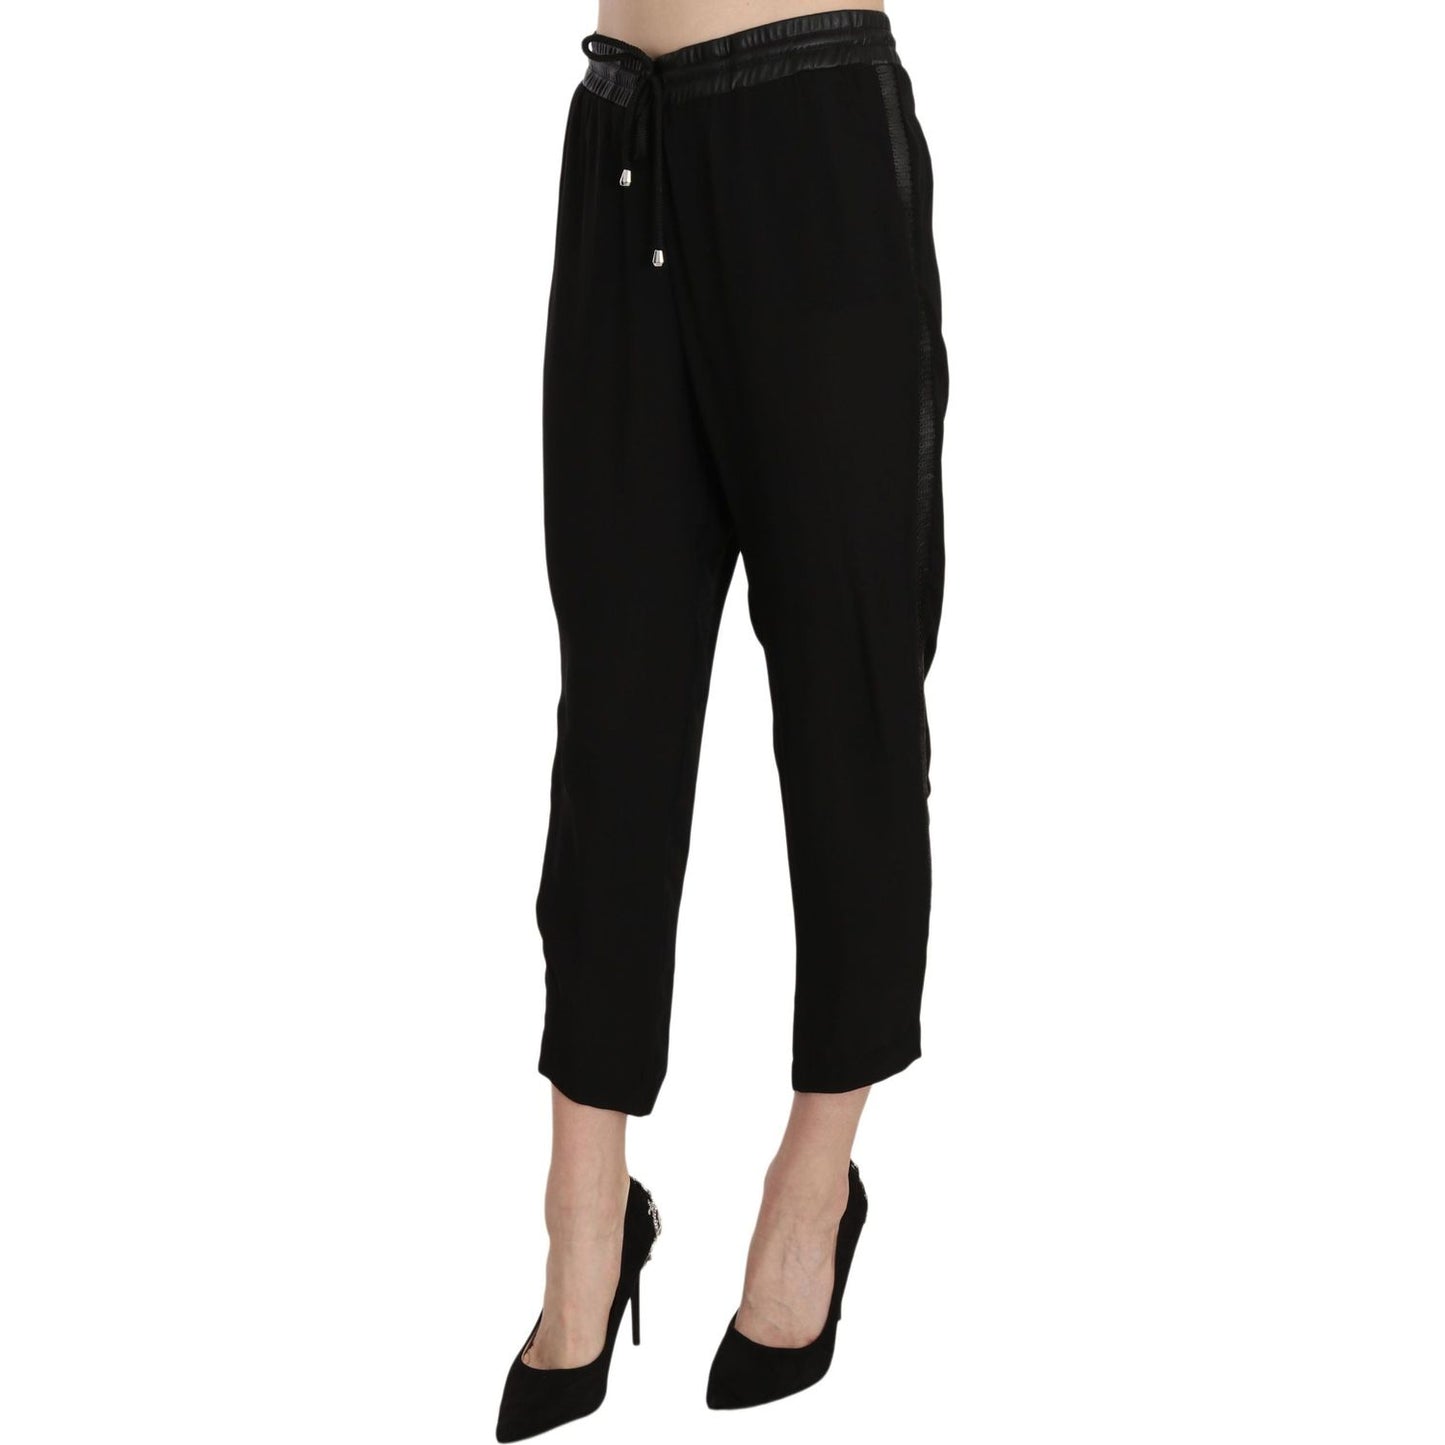 Guess | Black Polyester High Waist Cropped Trousers Pants | McRichard Designer Brands